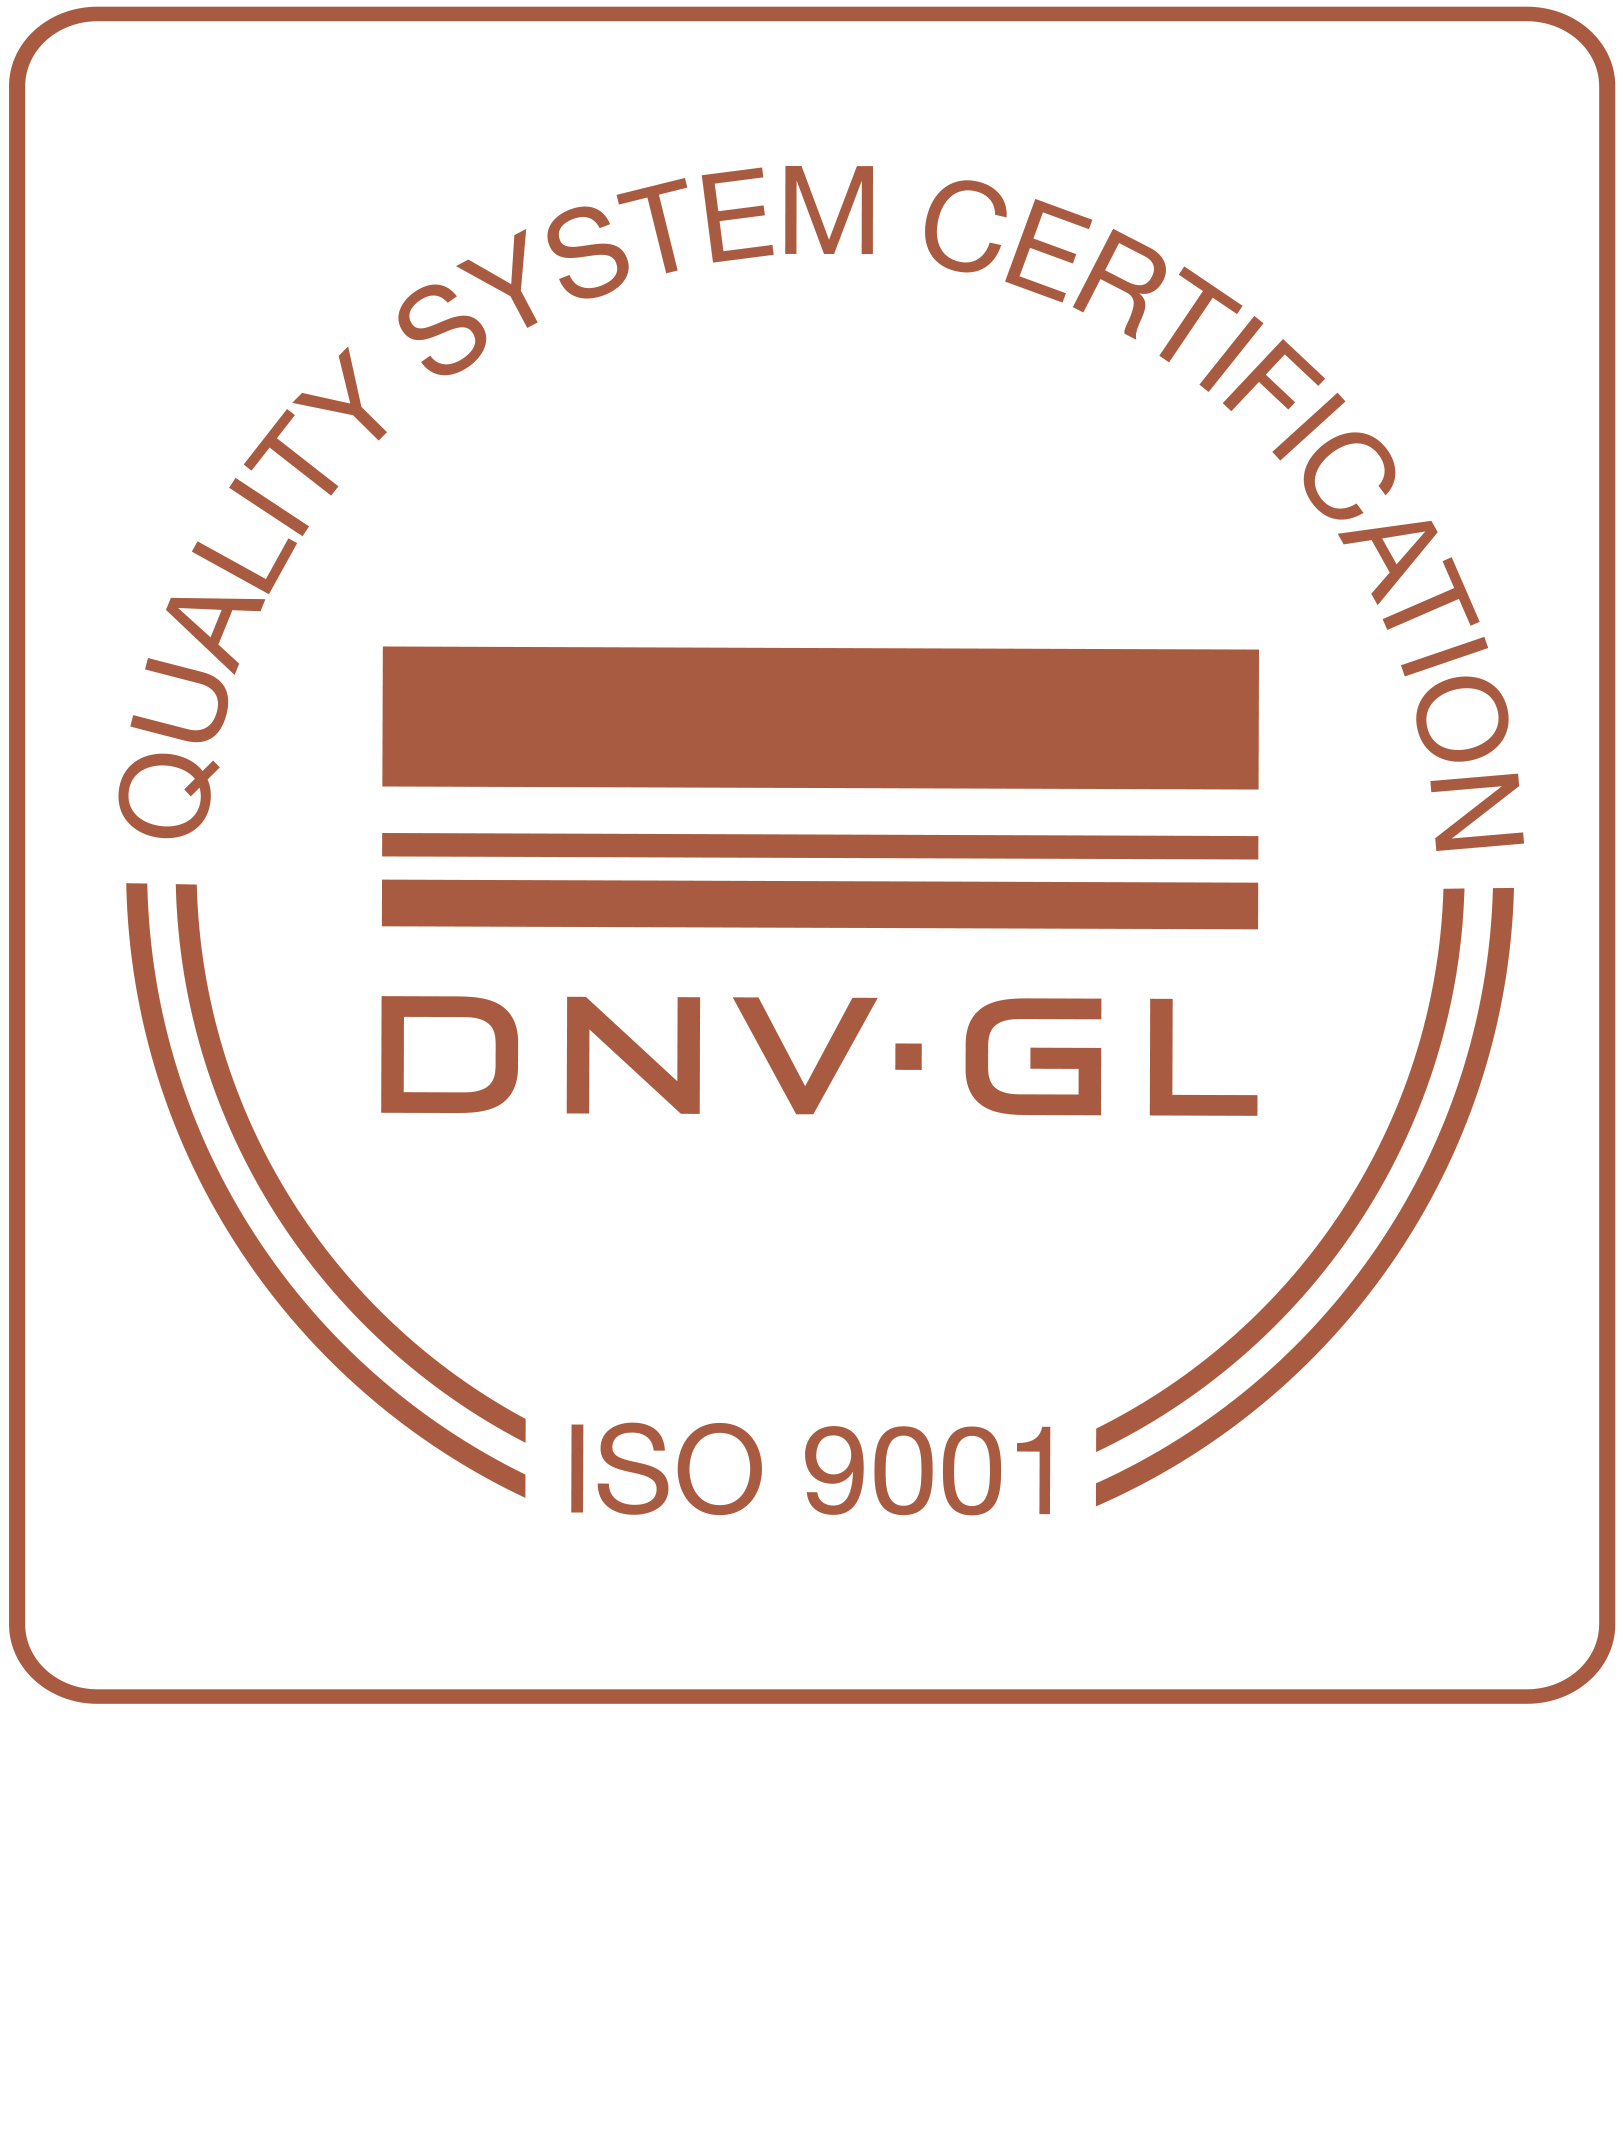 Vínculo a ISO 9001:2015